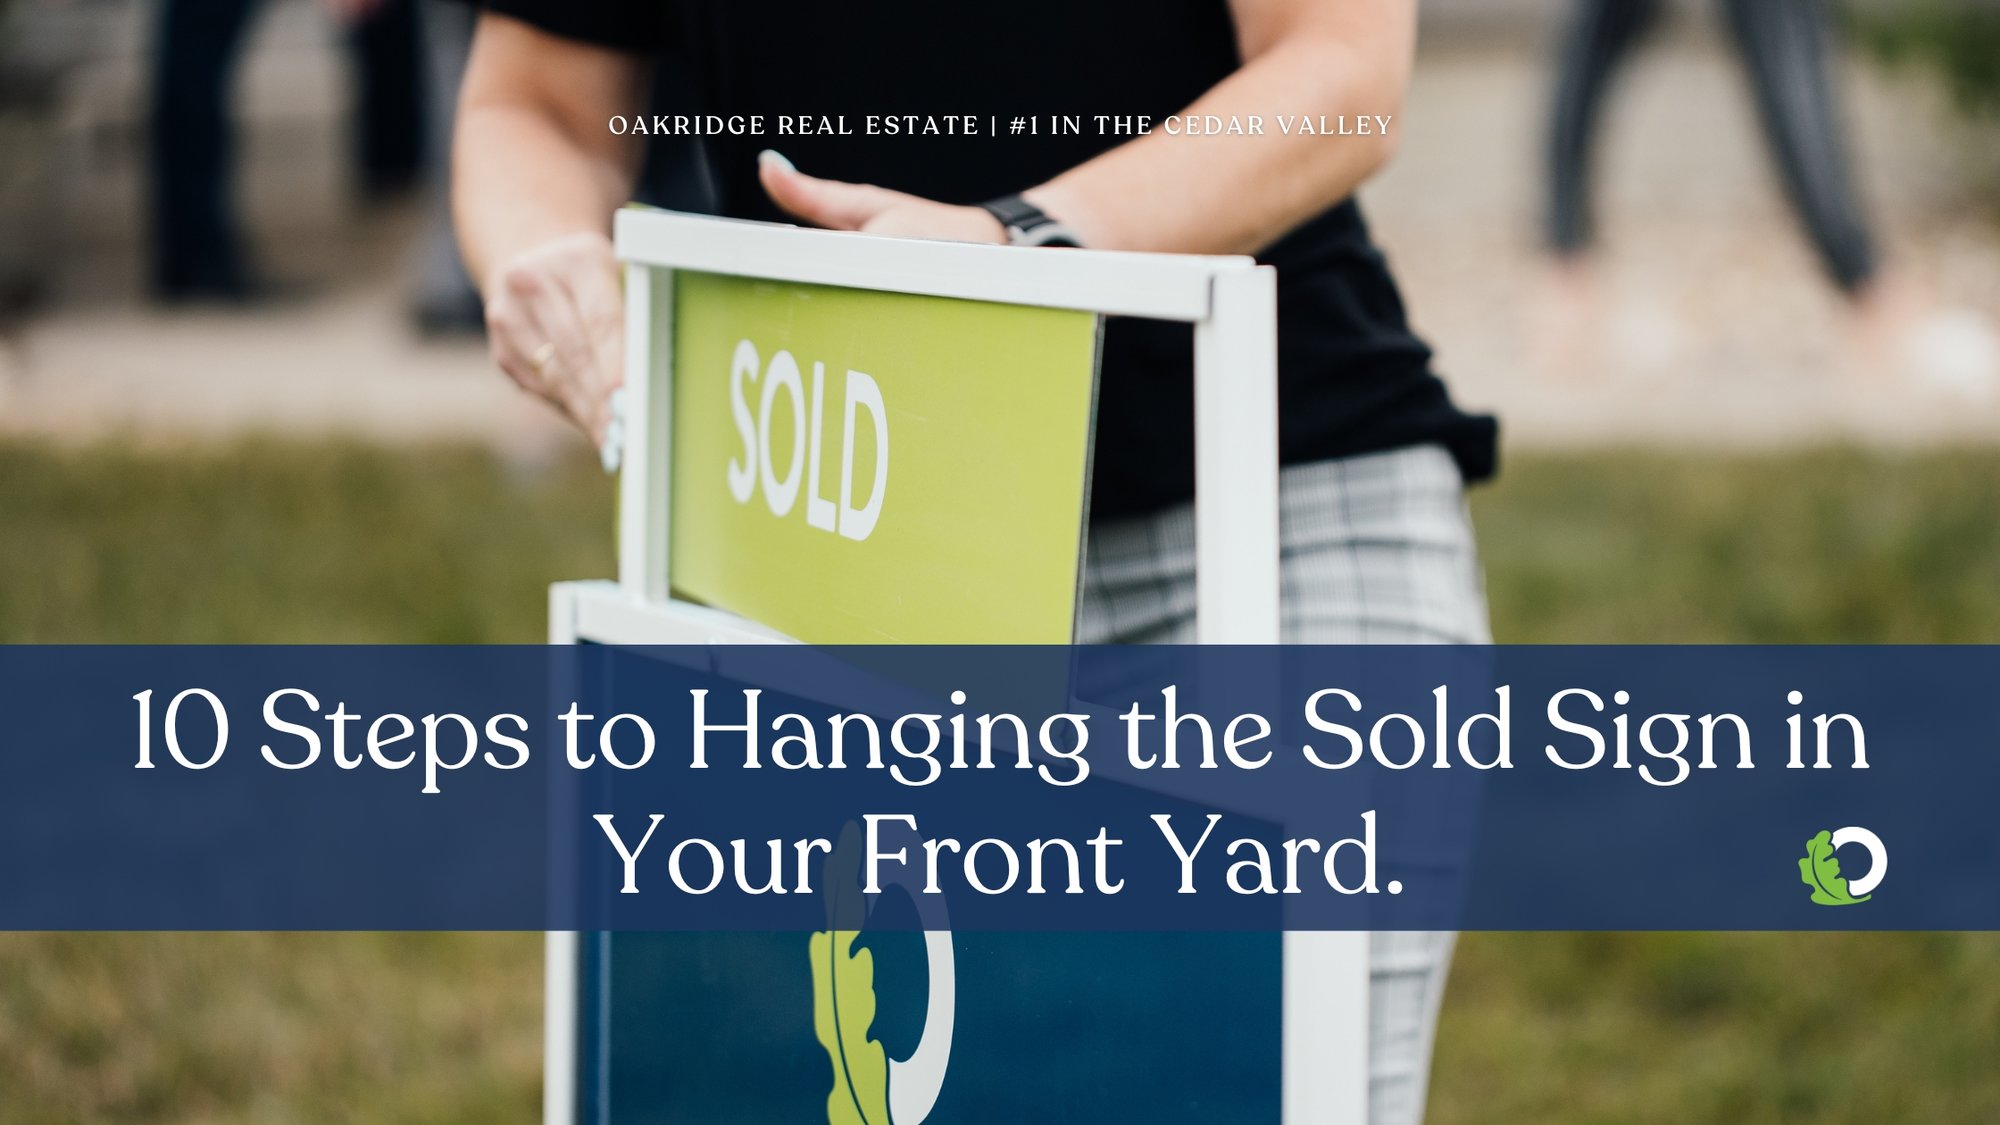 10 Steps to Hanging the Sold Sign in Your Front Yard